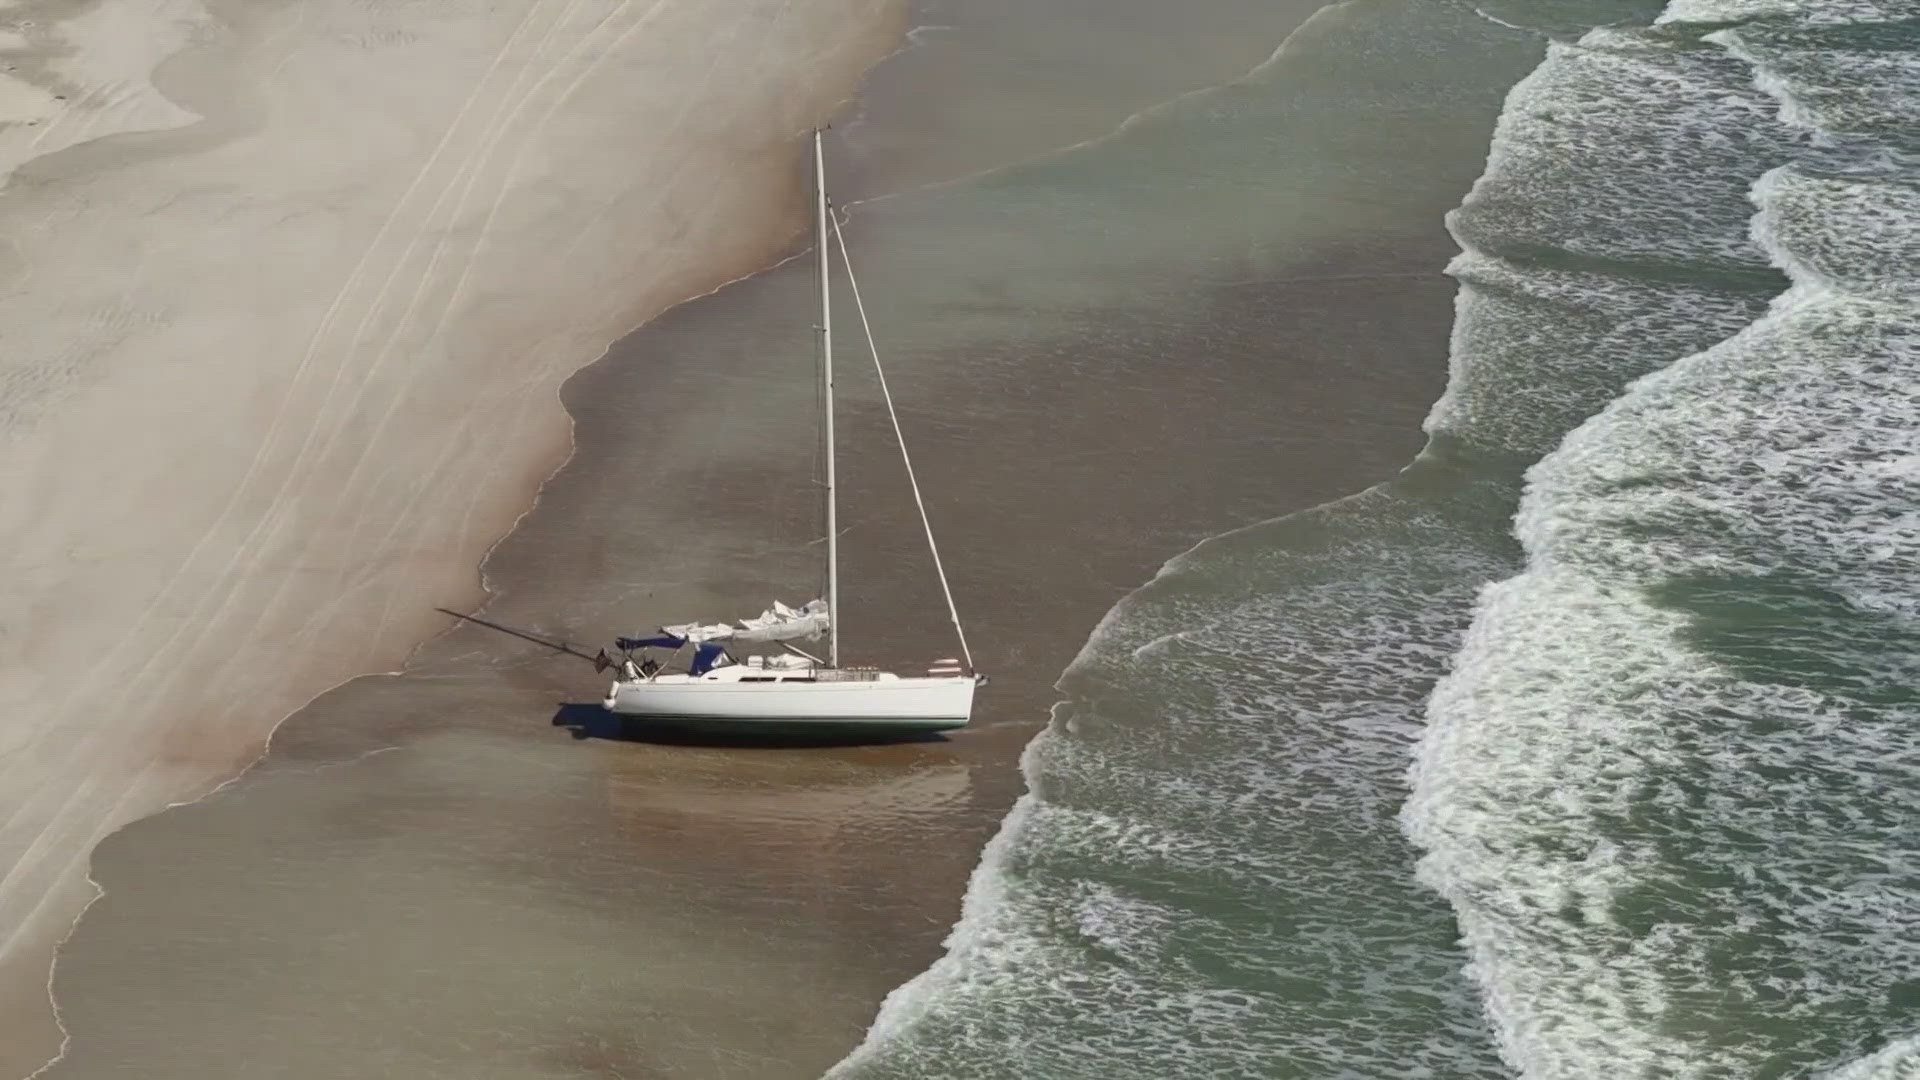 The sailboat owner has seven days to remove it from the sand before there are any penalties.